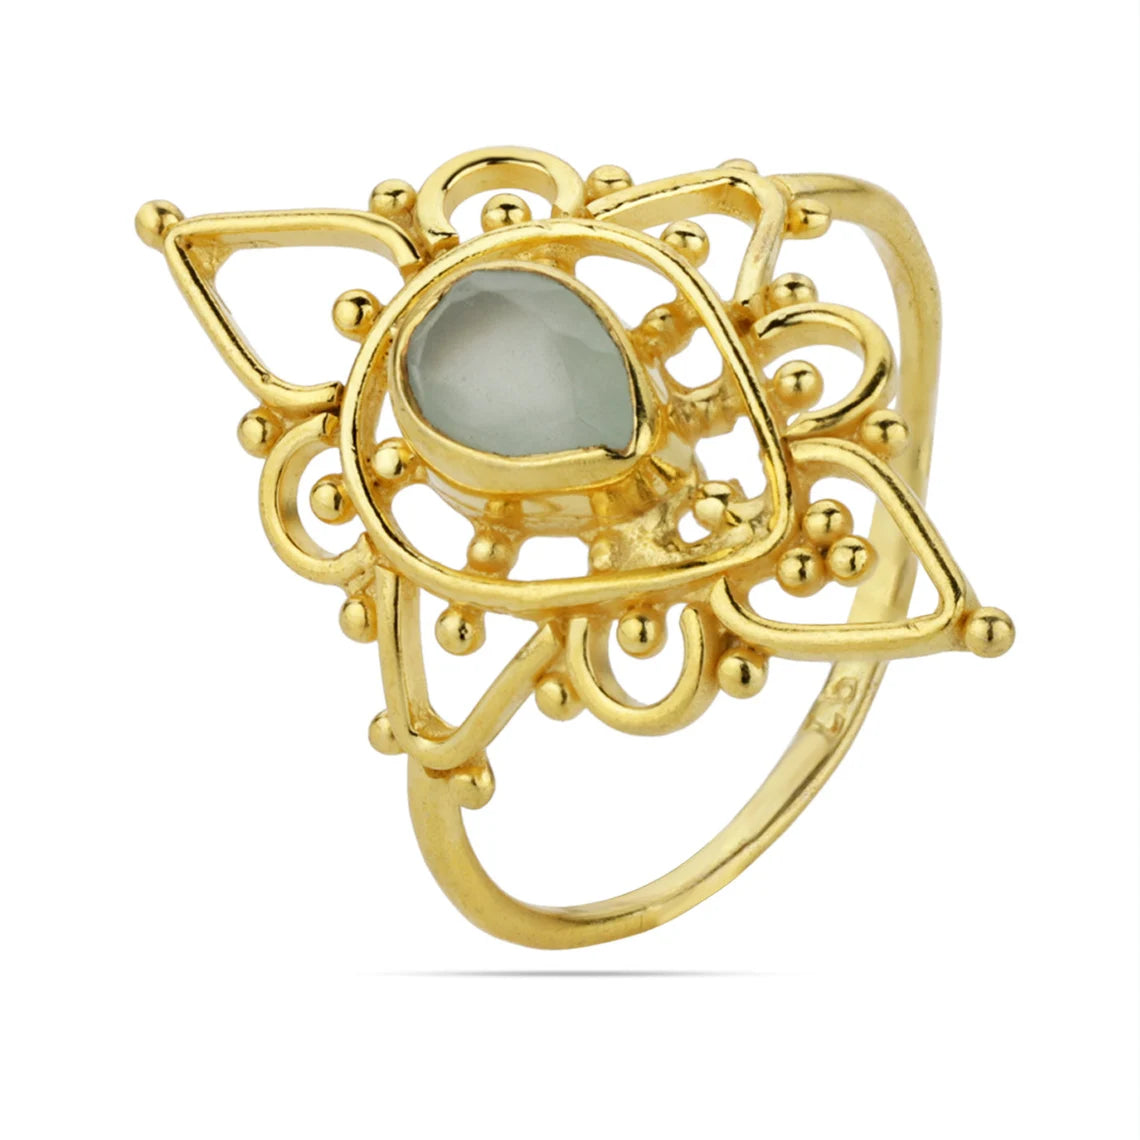 Aqua Onyx Ring - 925 Sterling Silver with Gold Plating, Handmade, Stackable, Designer, Pear Ring